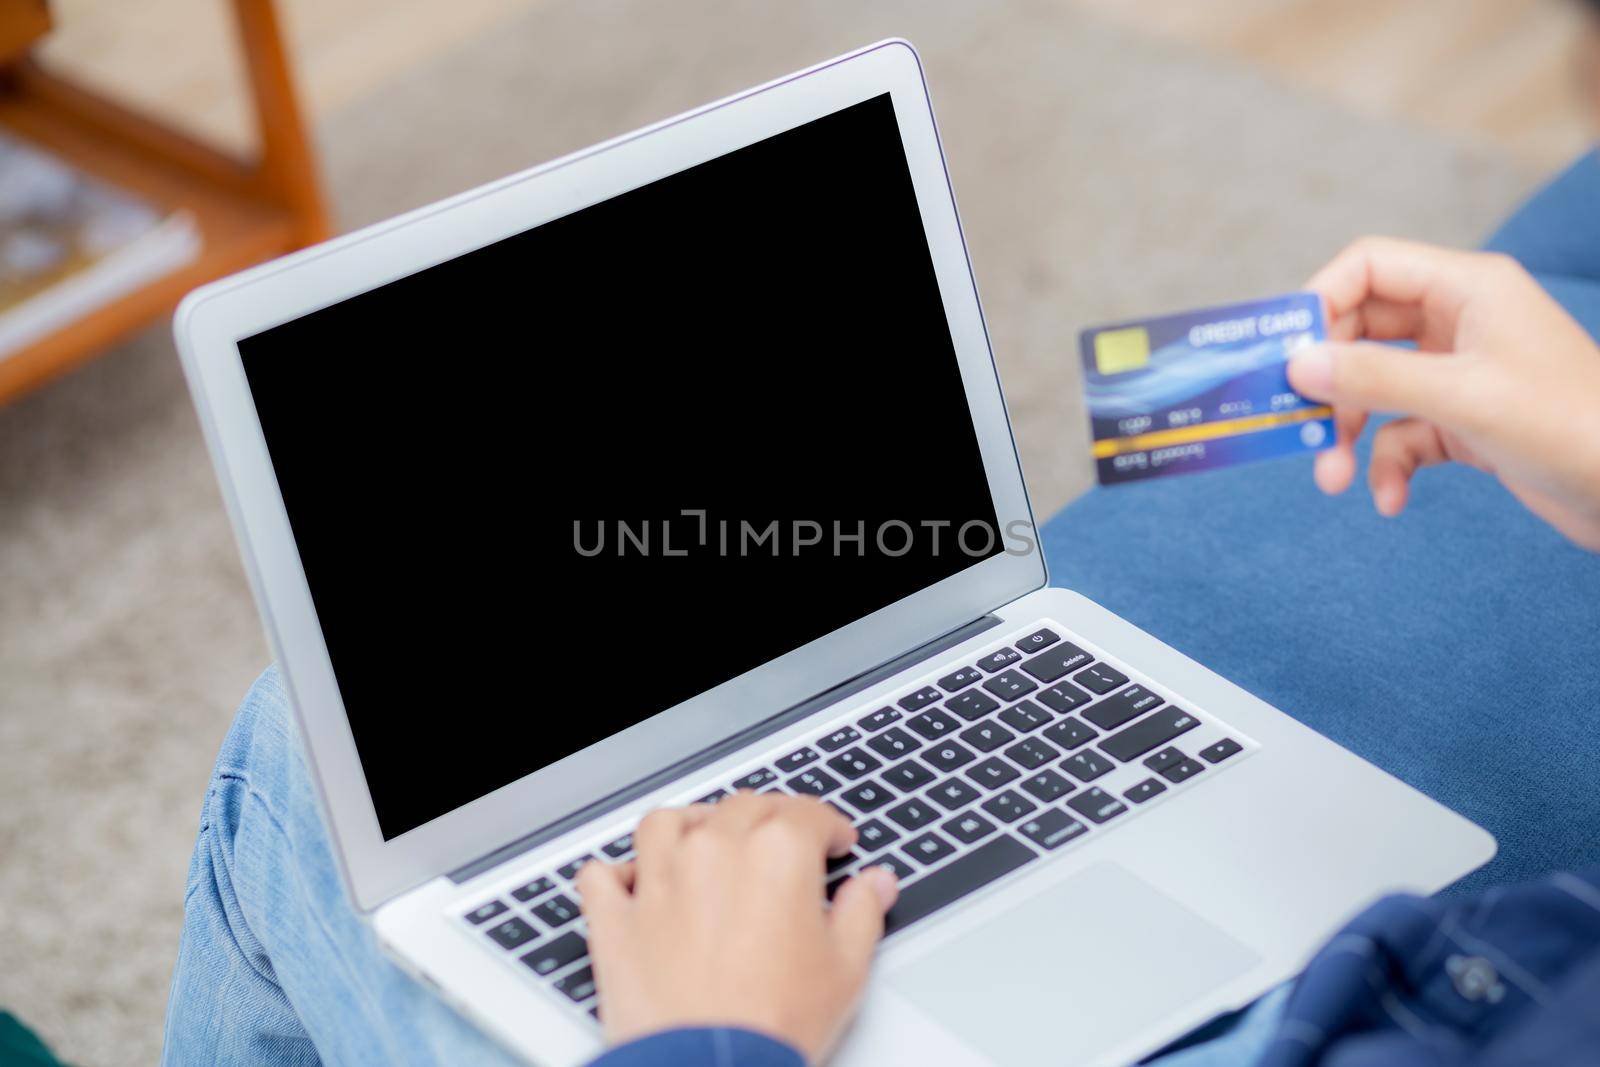 Hand of young man using laptop computer display blank screen shopping online with credit card on sofa at home, male purchase and payment with debit card, e-commerce and technology, lifestyle concept.